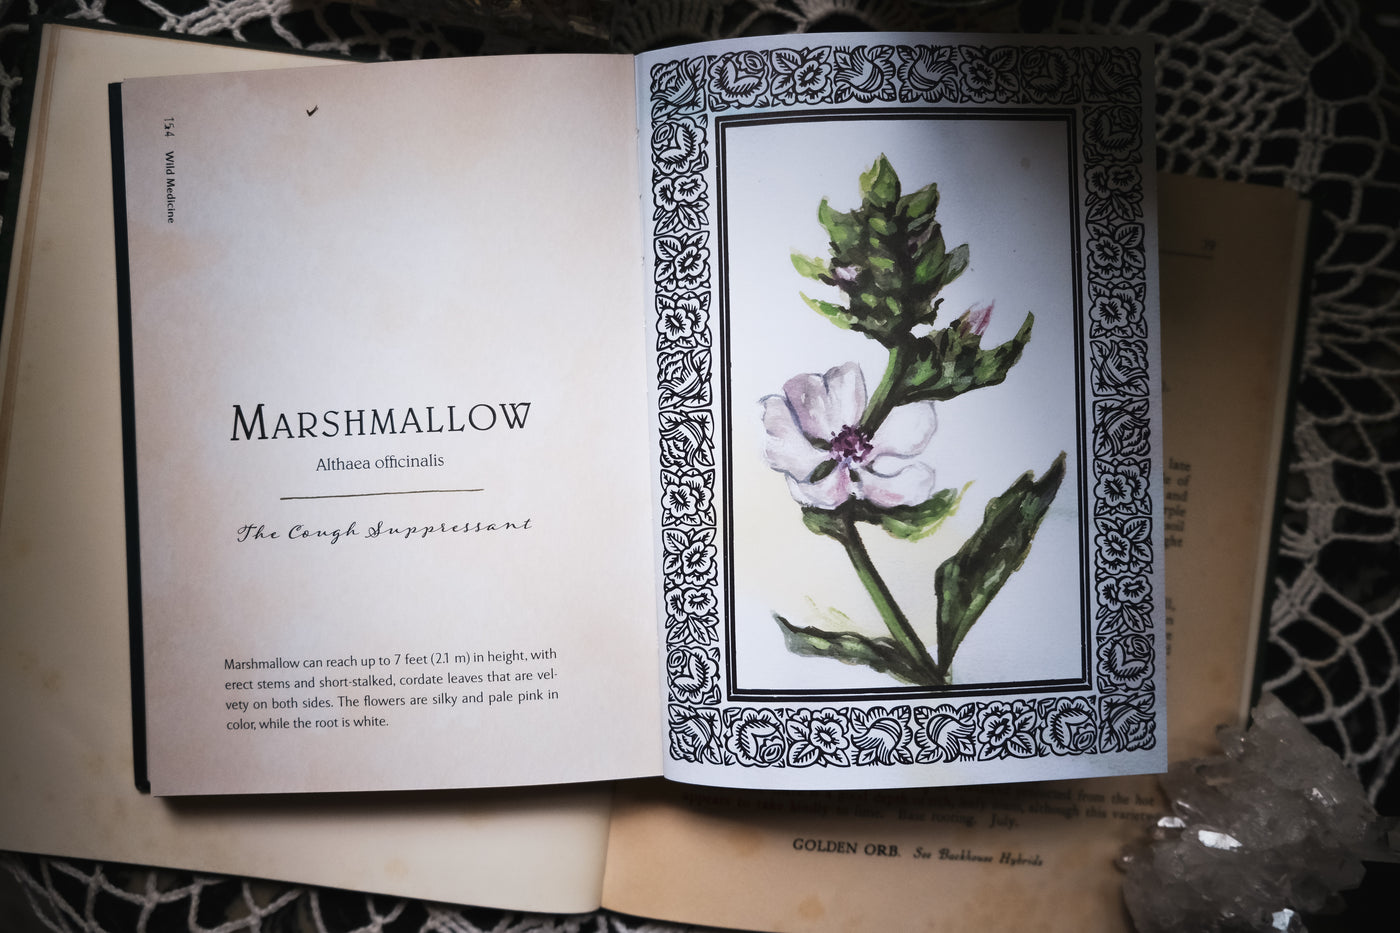 Wild Medicine: Tamed Wild's Illustrated Guide to the Magick of Herbs